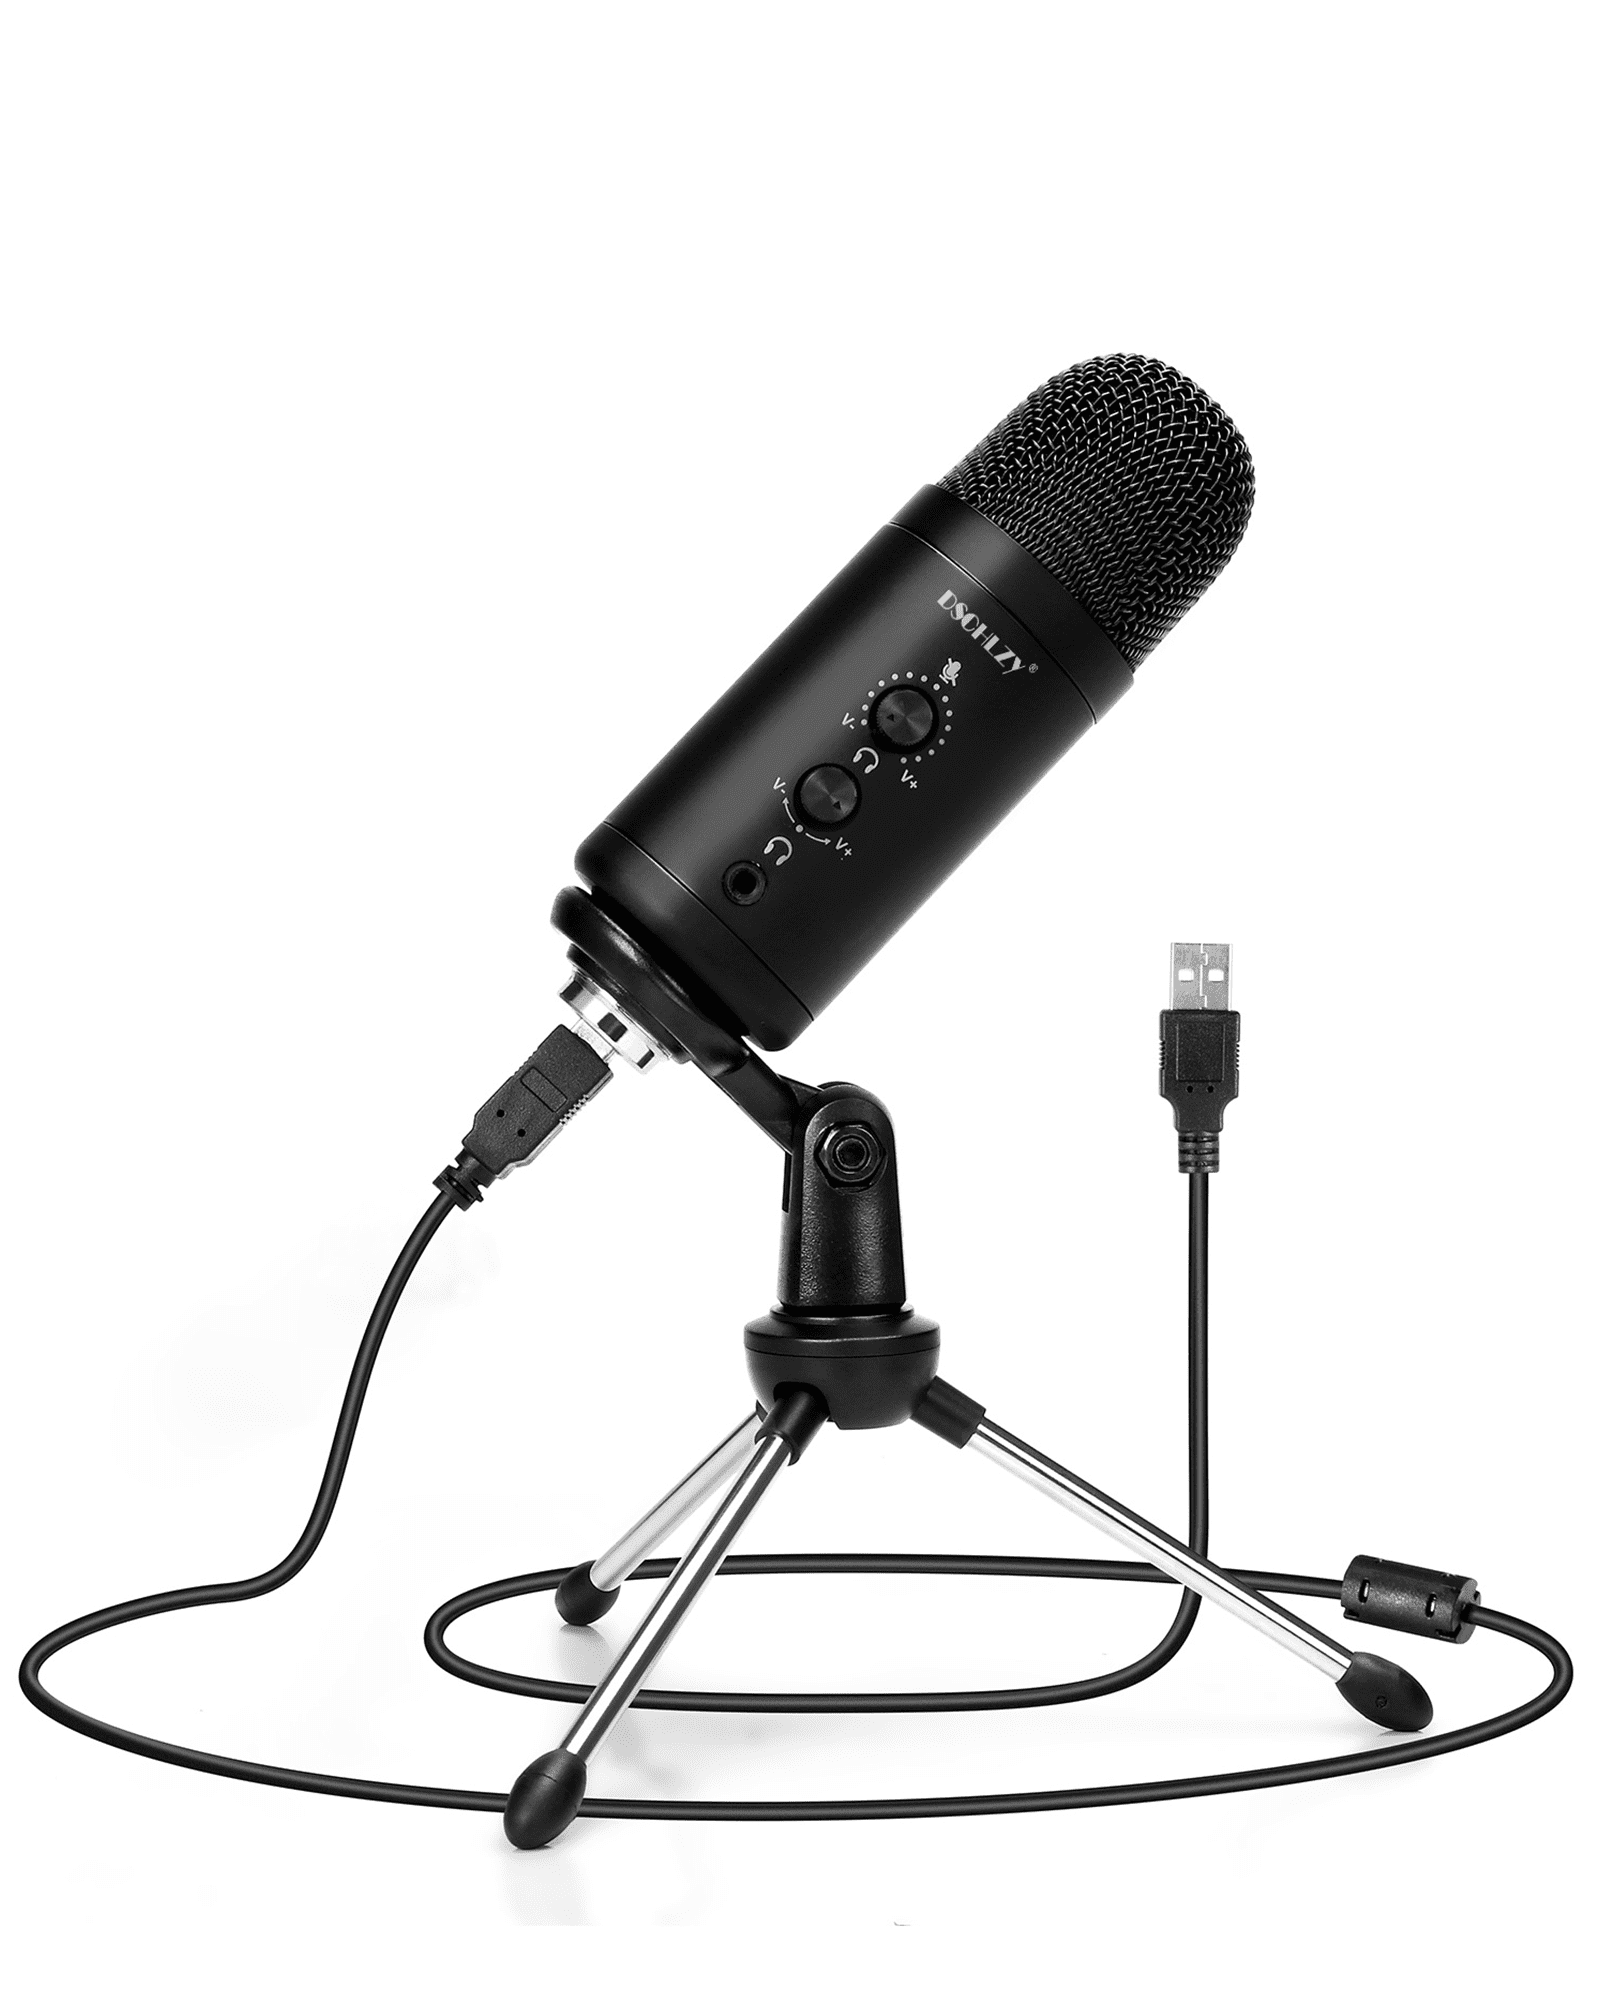 Podcast Microphone for Phone, MTPHOEY Professional USB Microphone  forTikTok/PC/Pad/PS4/i*O*S/Android,Computer Mic with Noise Cancelling,Asmr